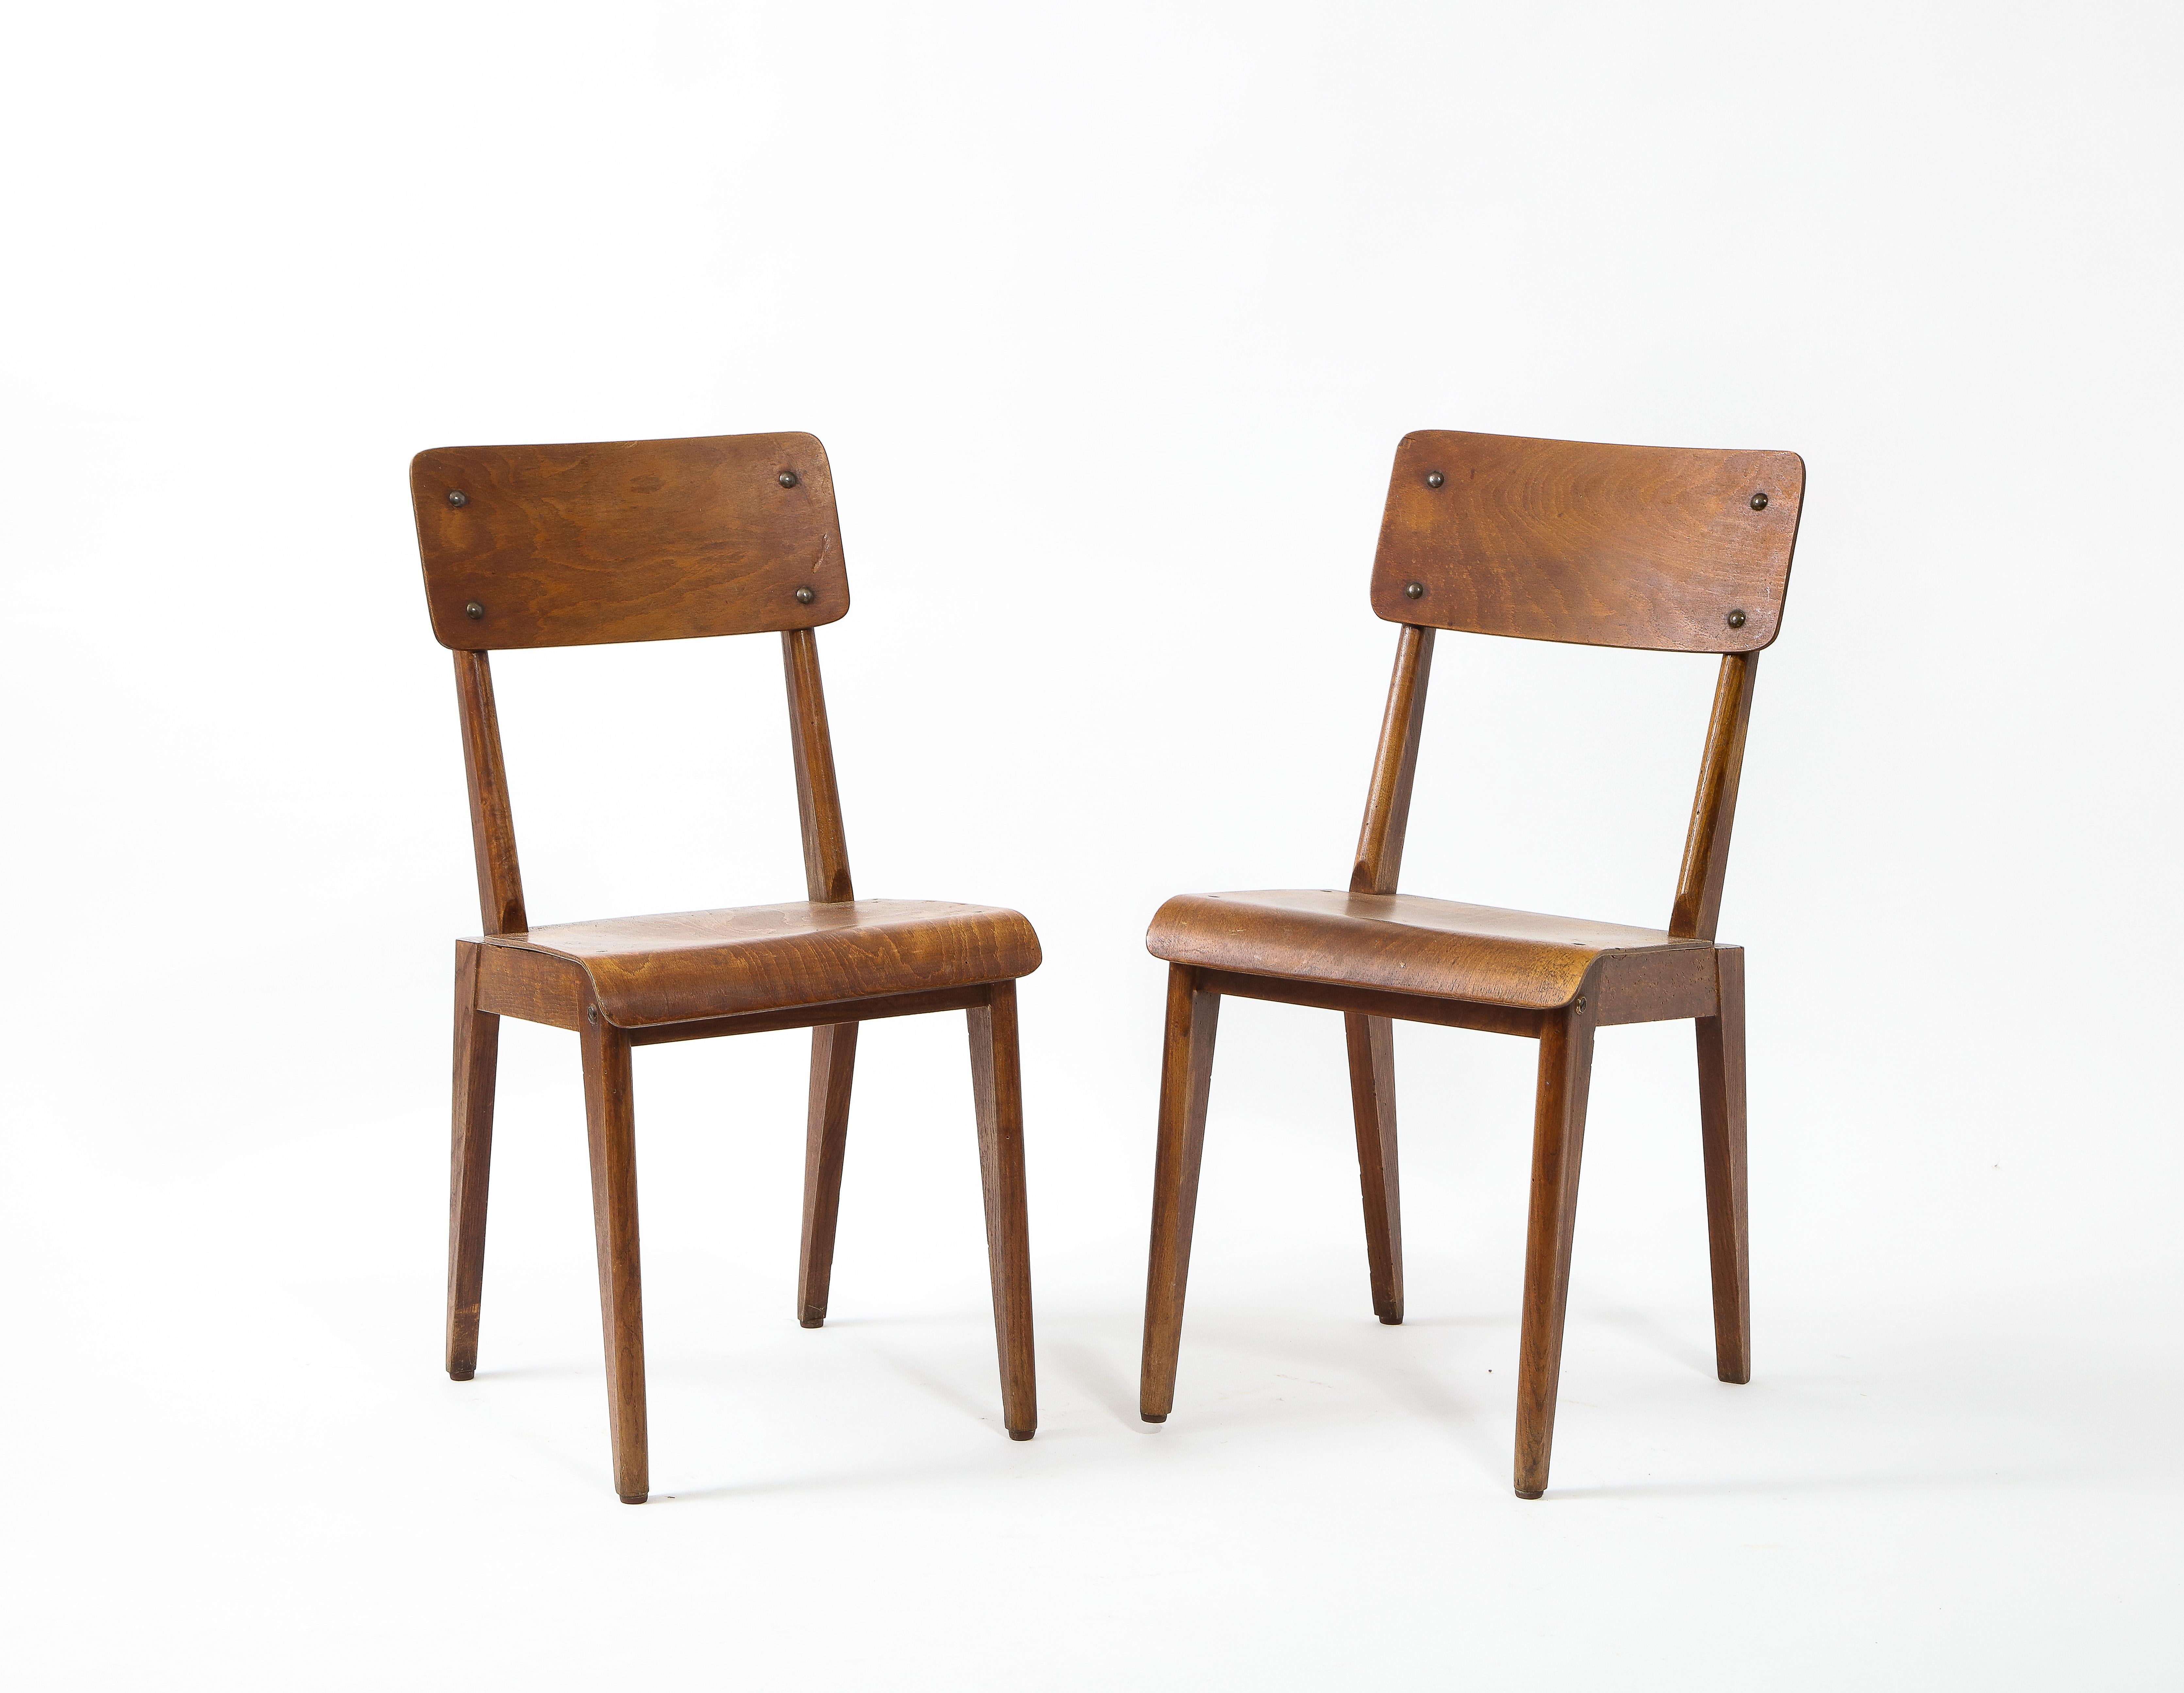 A pair of plywood chairs from the post-war reconstruction period with canted back legs.